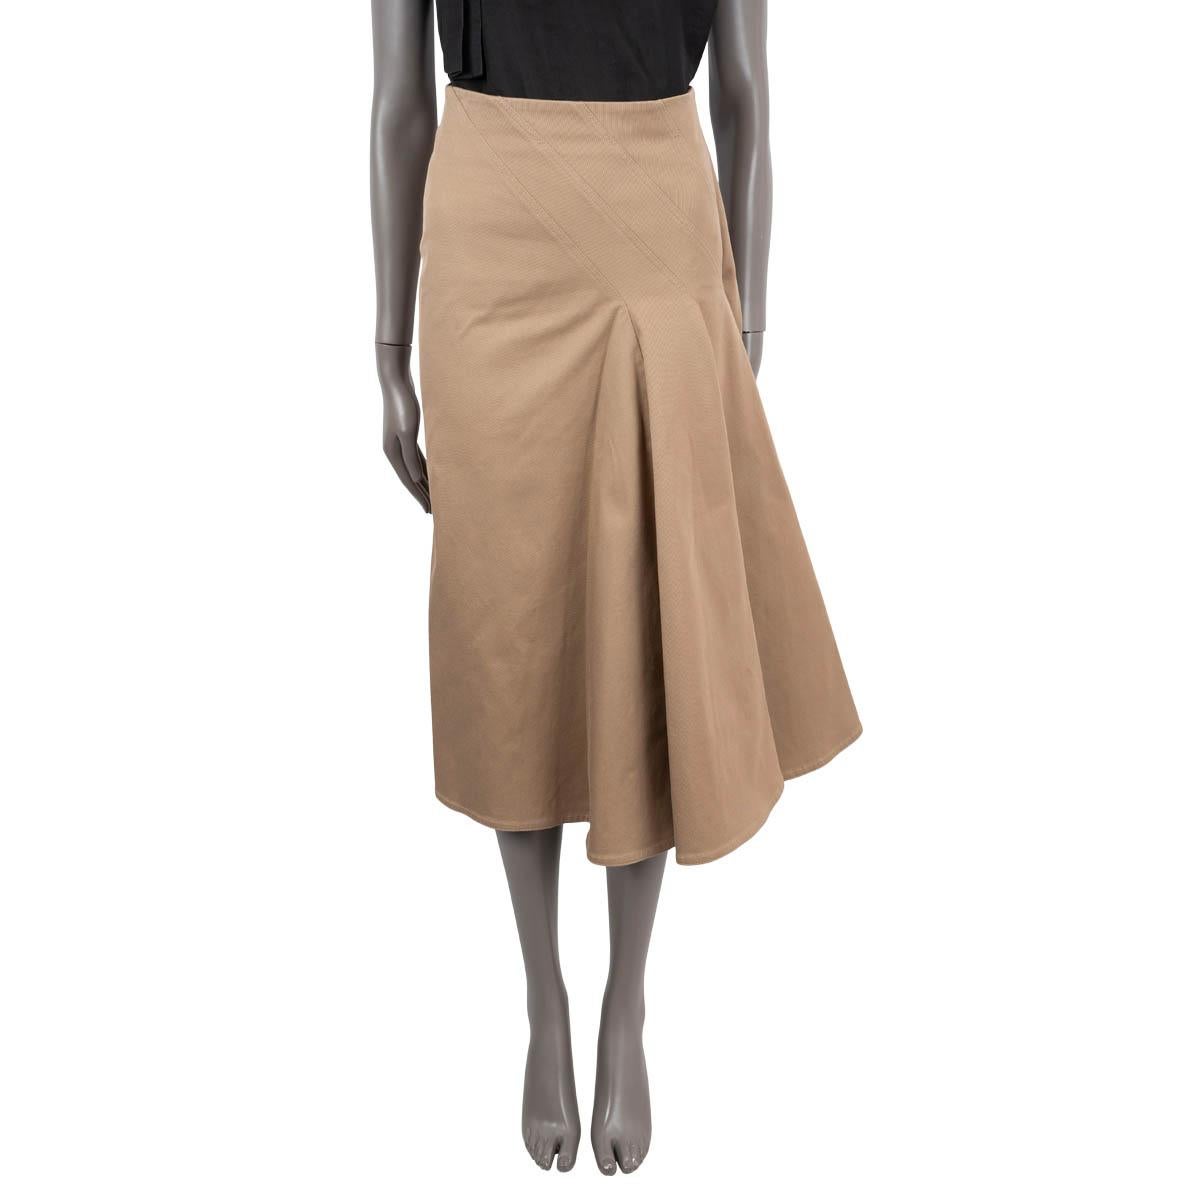 100% authentic Christian Dior diagonal pleated midi skirt in tan brown cotton (97%) and elastane (3%). Opens with concealed zipper and a hook on the side. Lined in silk (100%). Has been worn and is in excellent condition.

2019